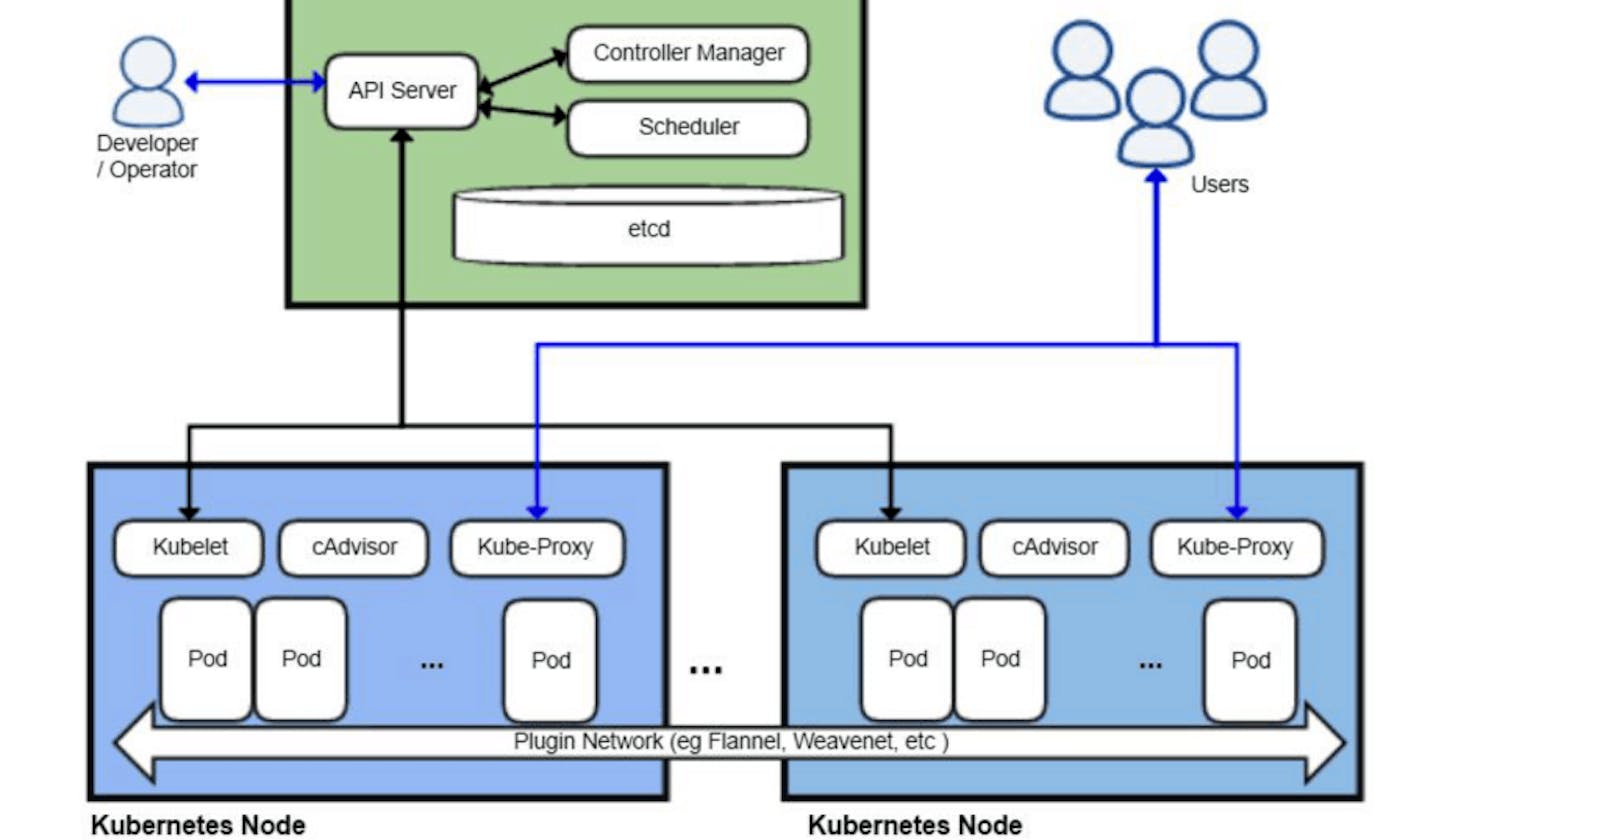 Kubernetes Architecture and Components